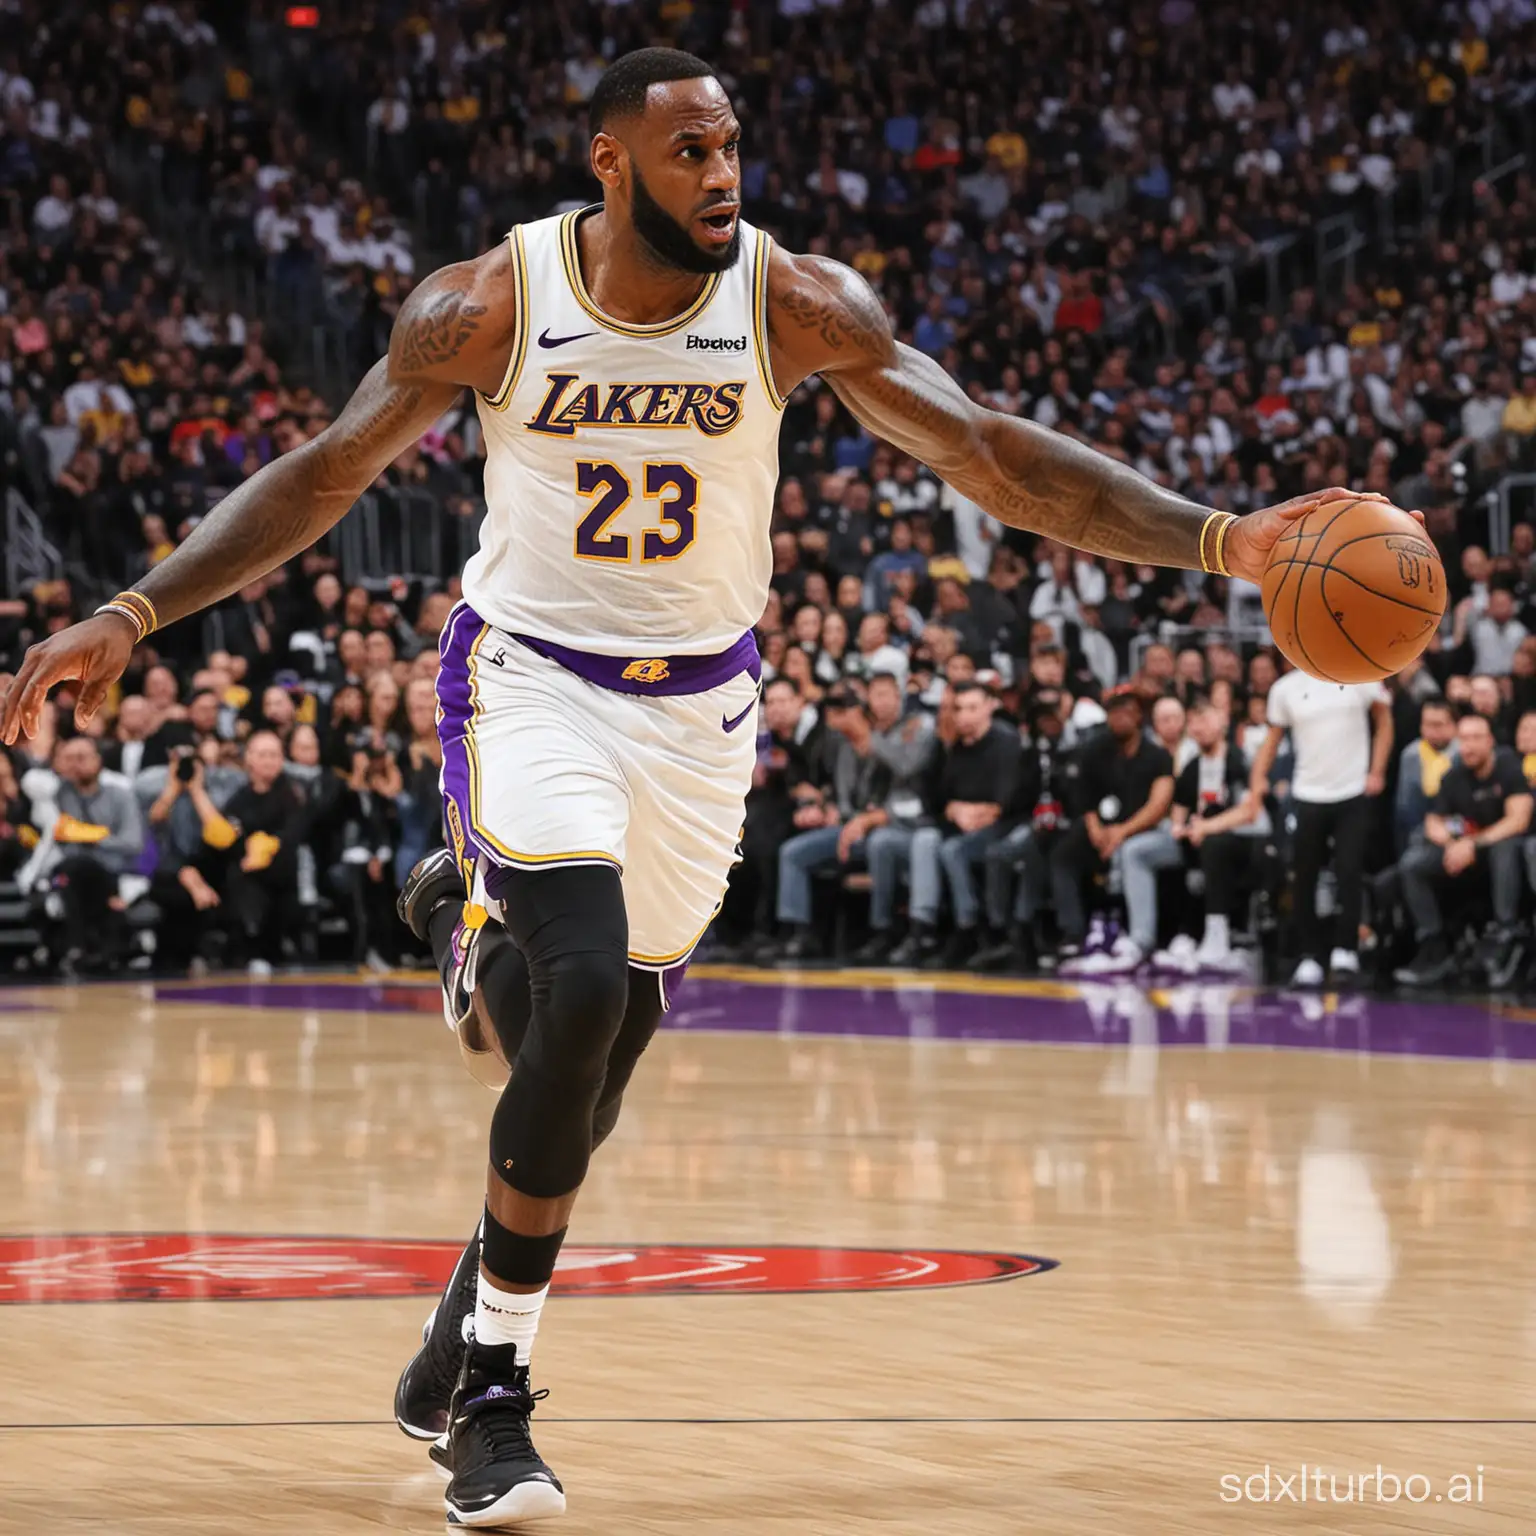 The Los Angeles Lakers' LeBron James